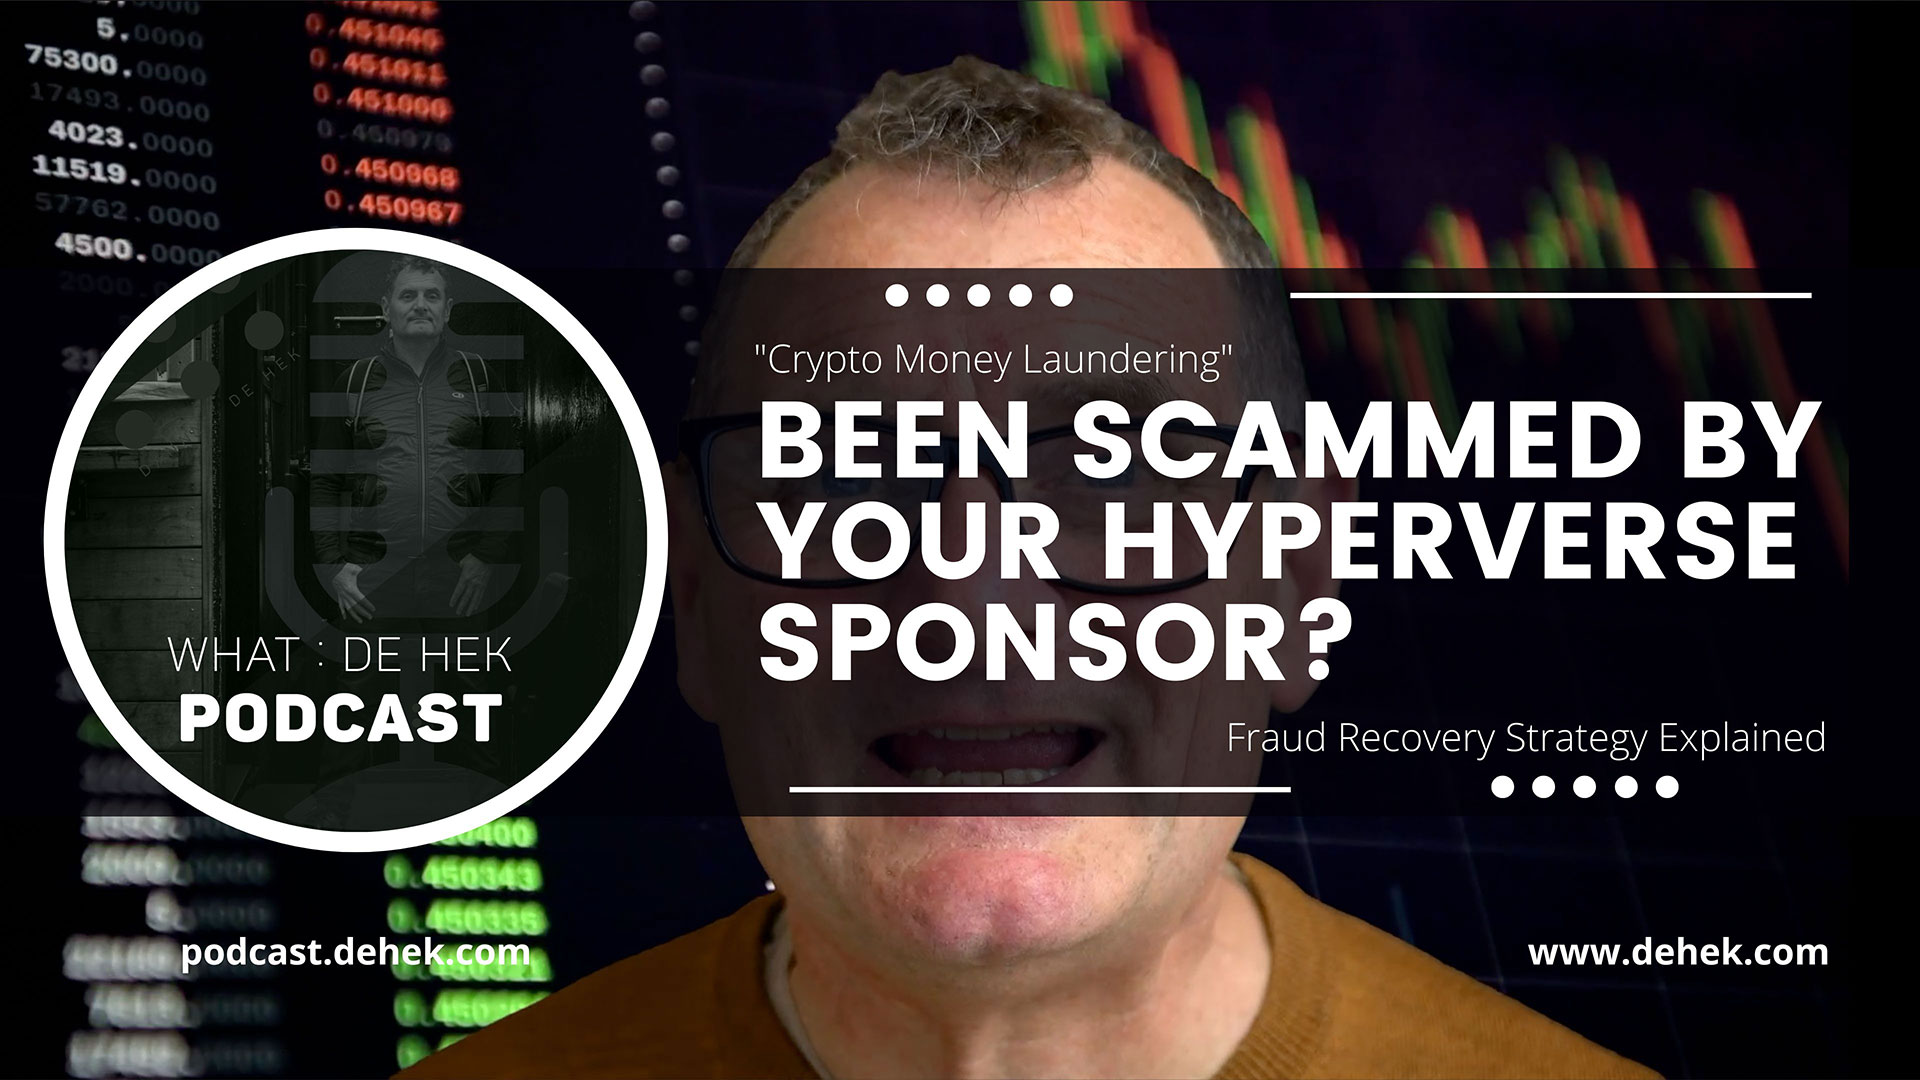 "Crypto Money Laundering" Been Scammed by your HyperVerse Sponsor? Fraud Recovery Strategy Explained